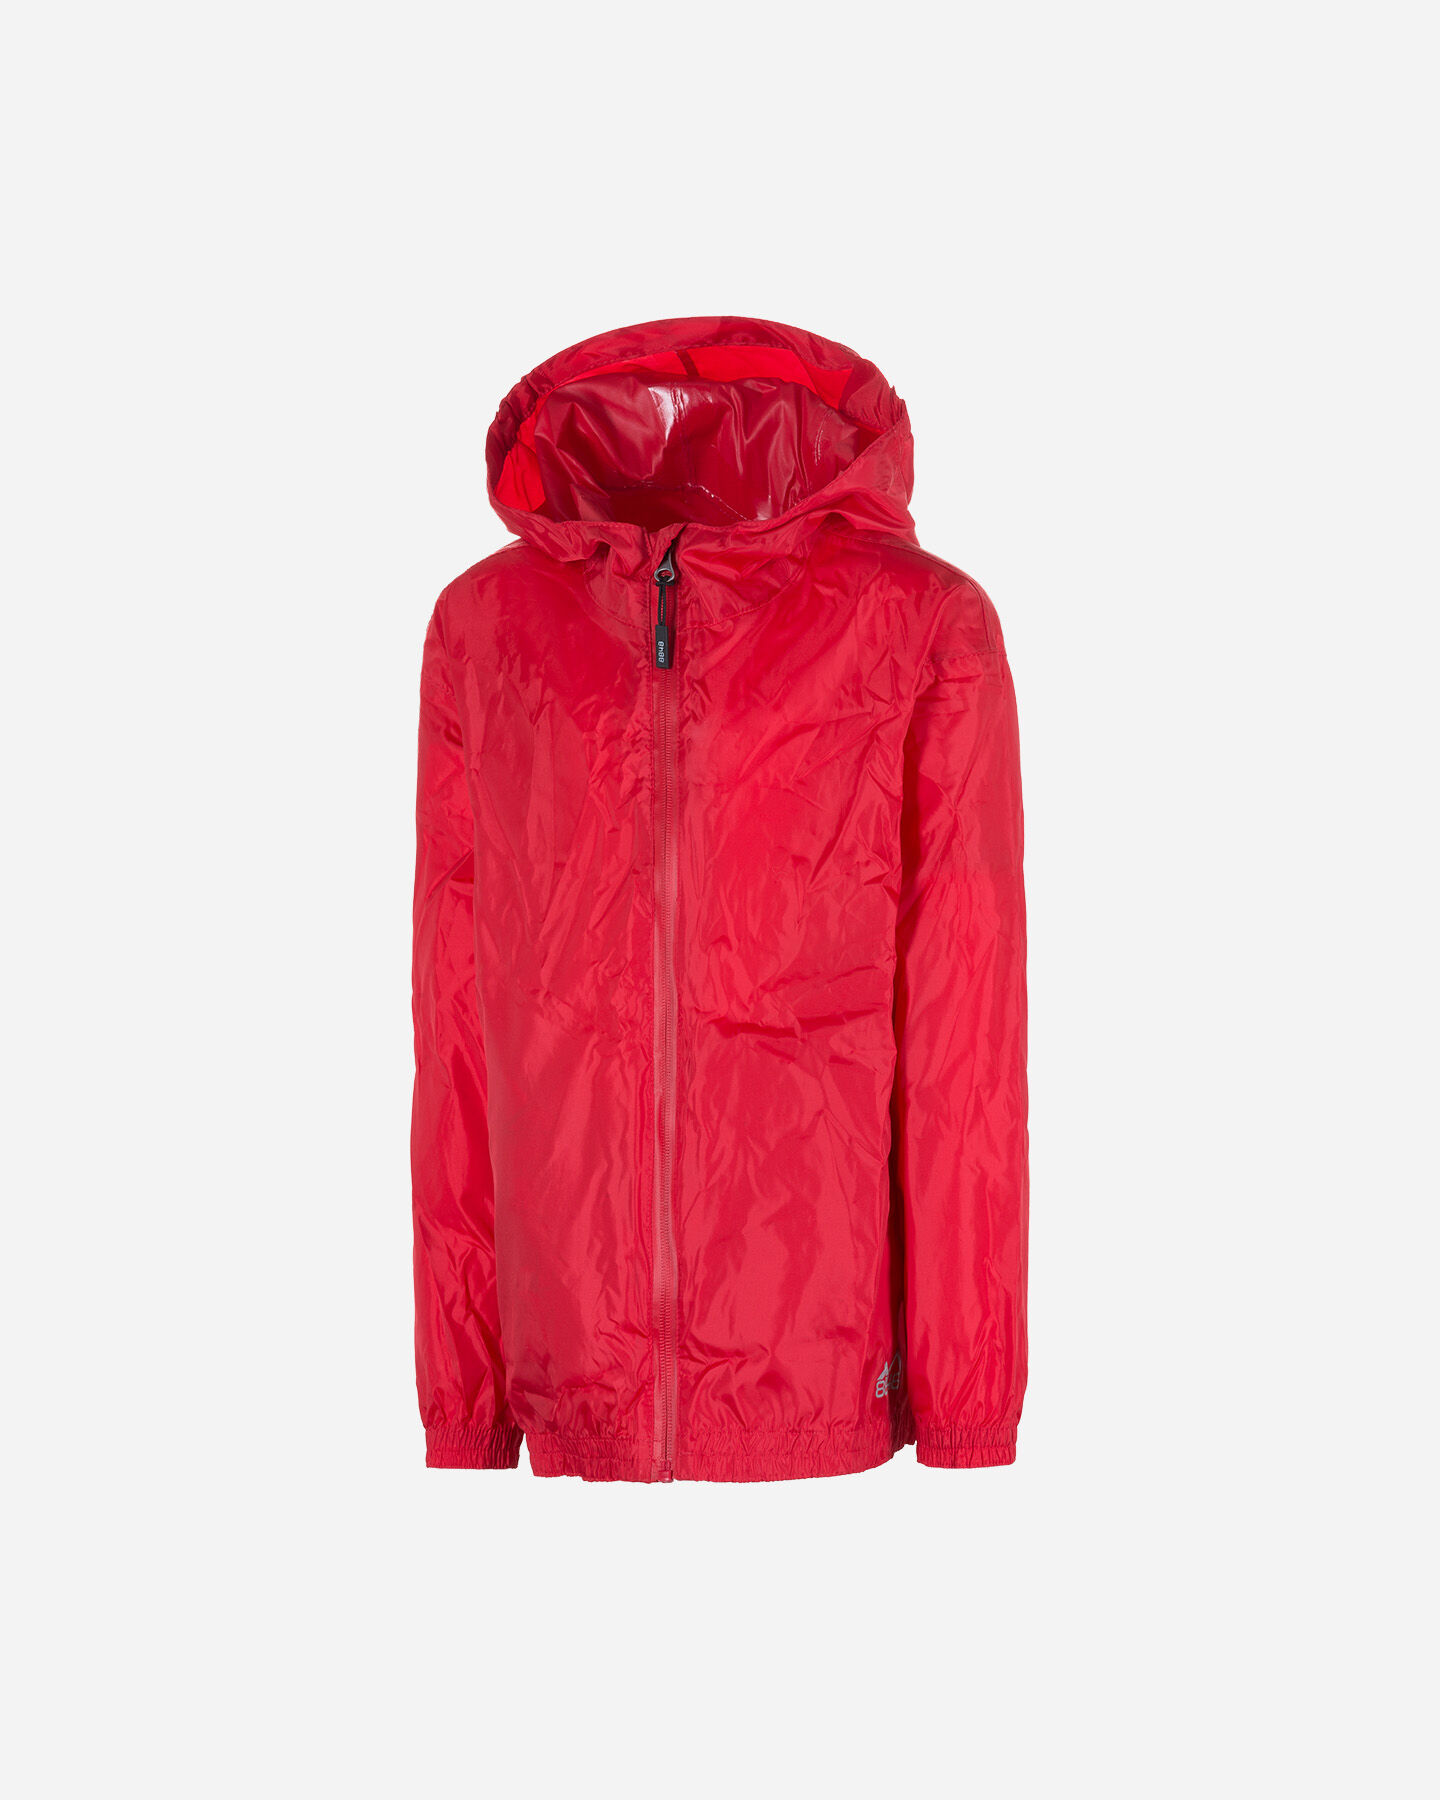  Giacca antipioggia 8848 RAIN PACKABLE JR S4076224|CO-RED|8A scatto 0